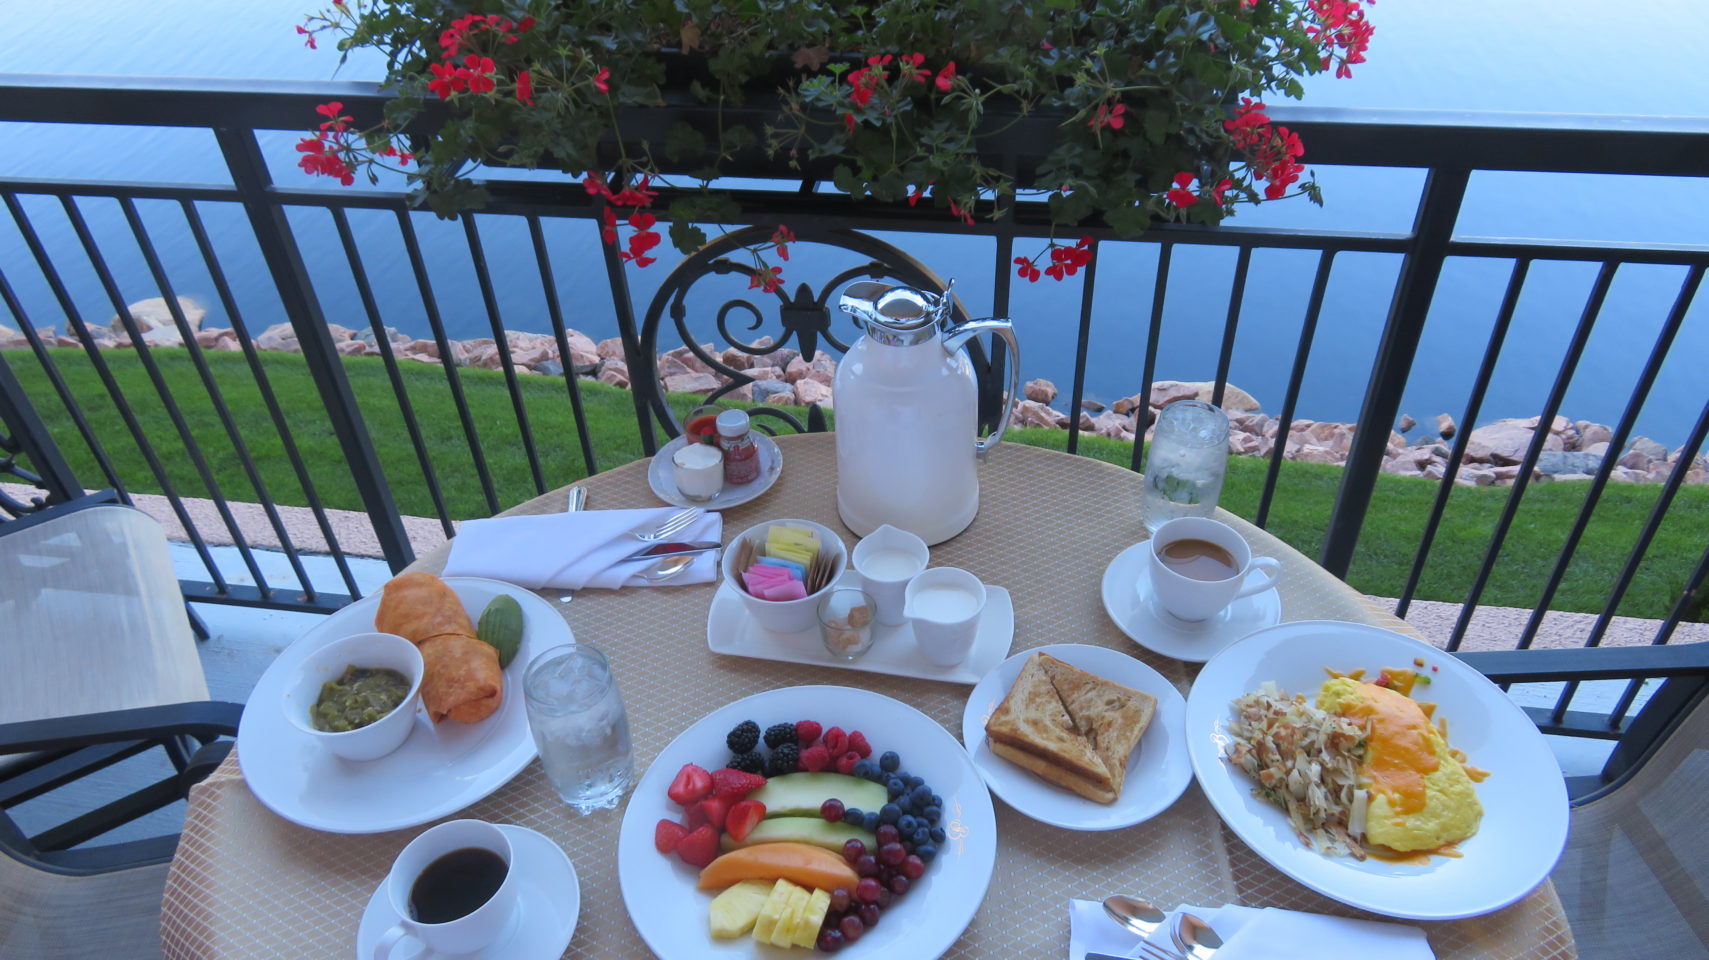 The Broadmoor Restaurants ~ Breakfast on our room balcony compliments of Room Service